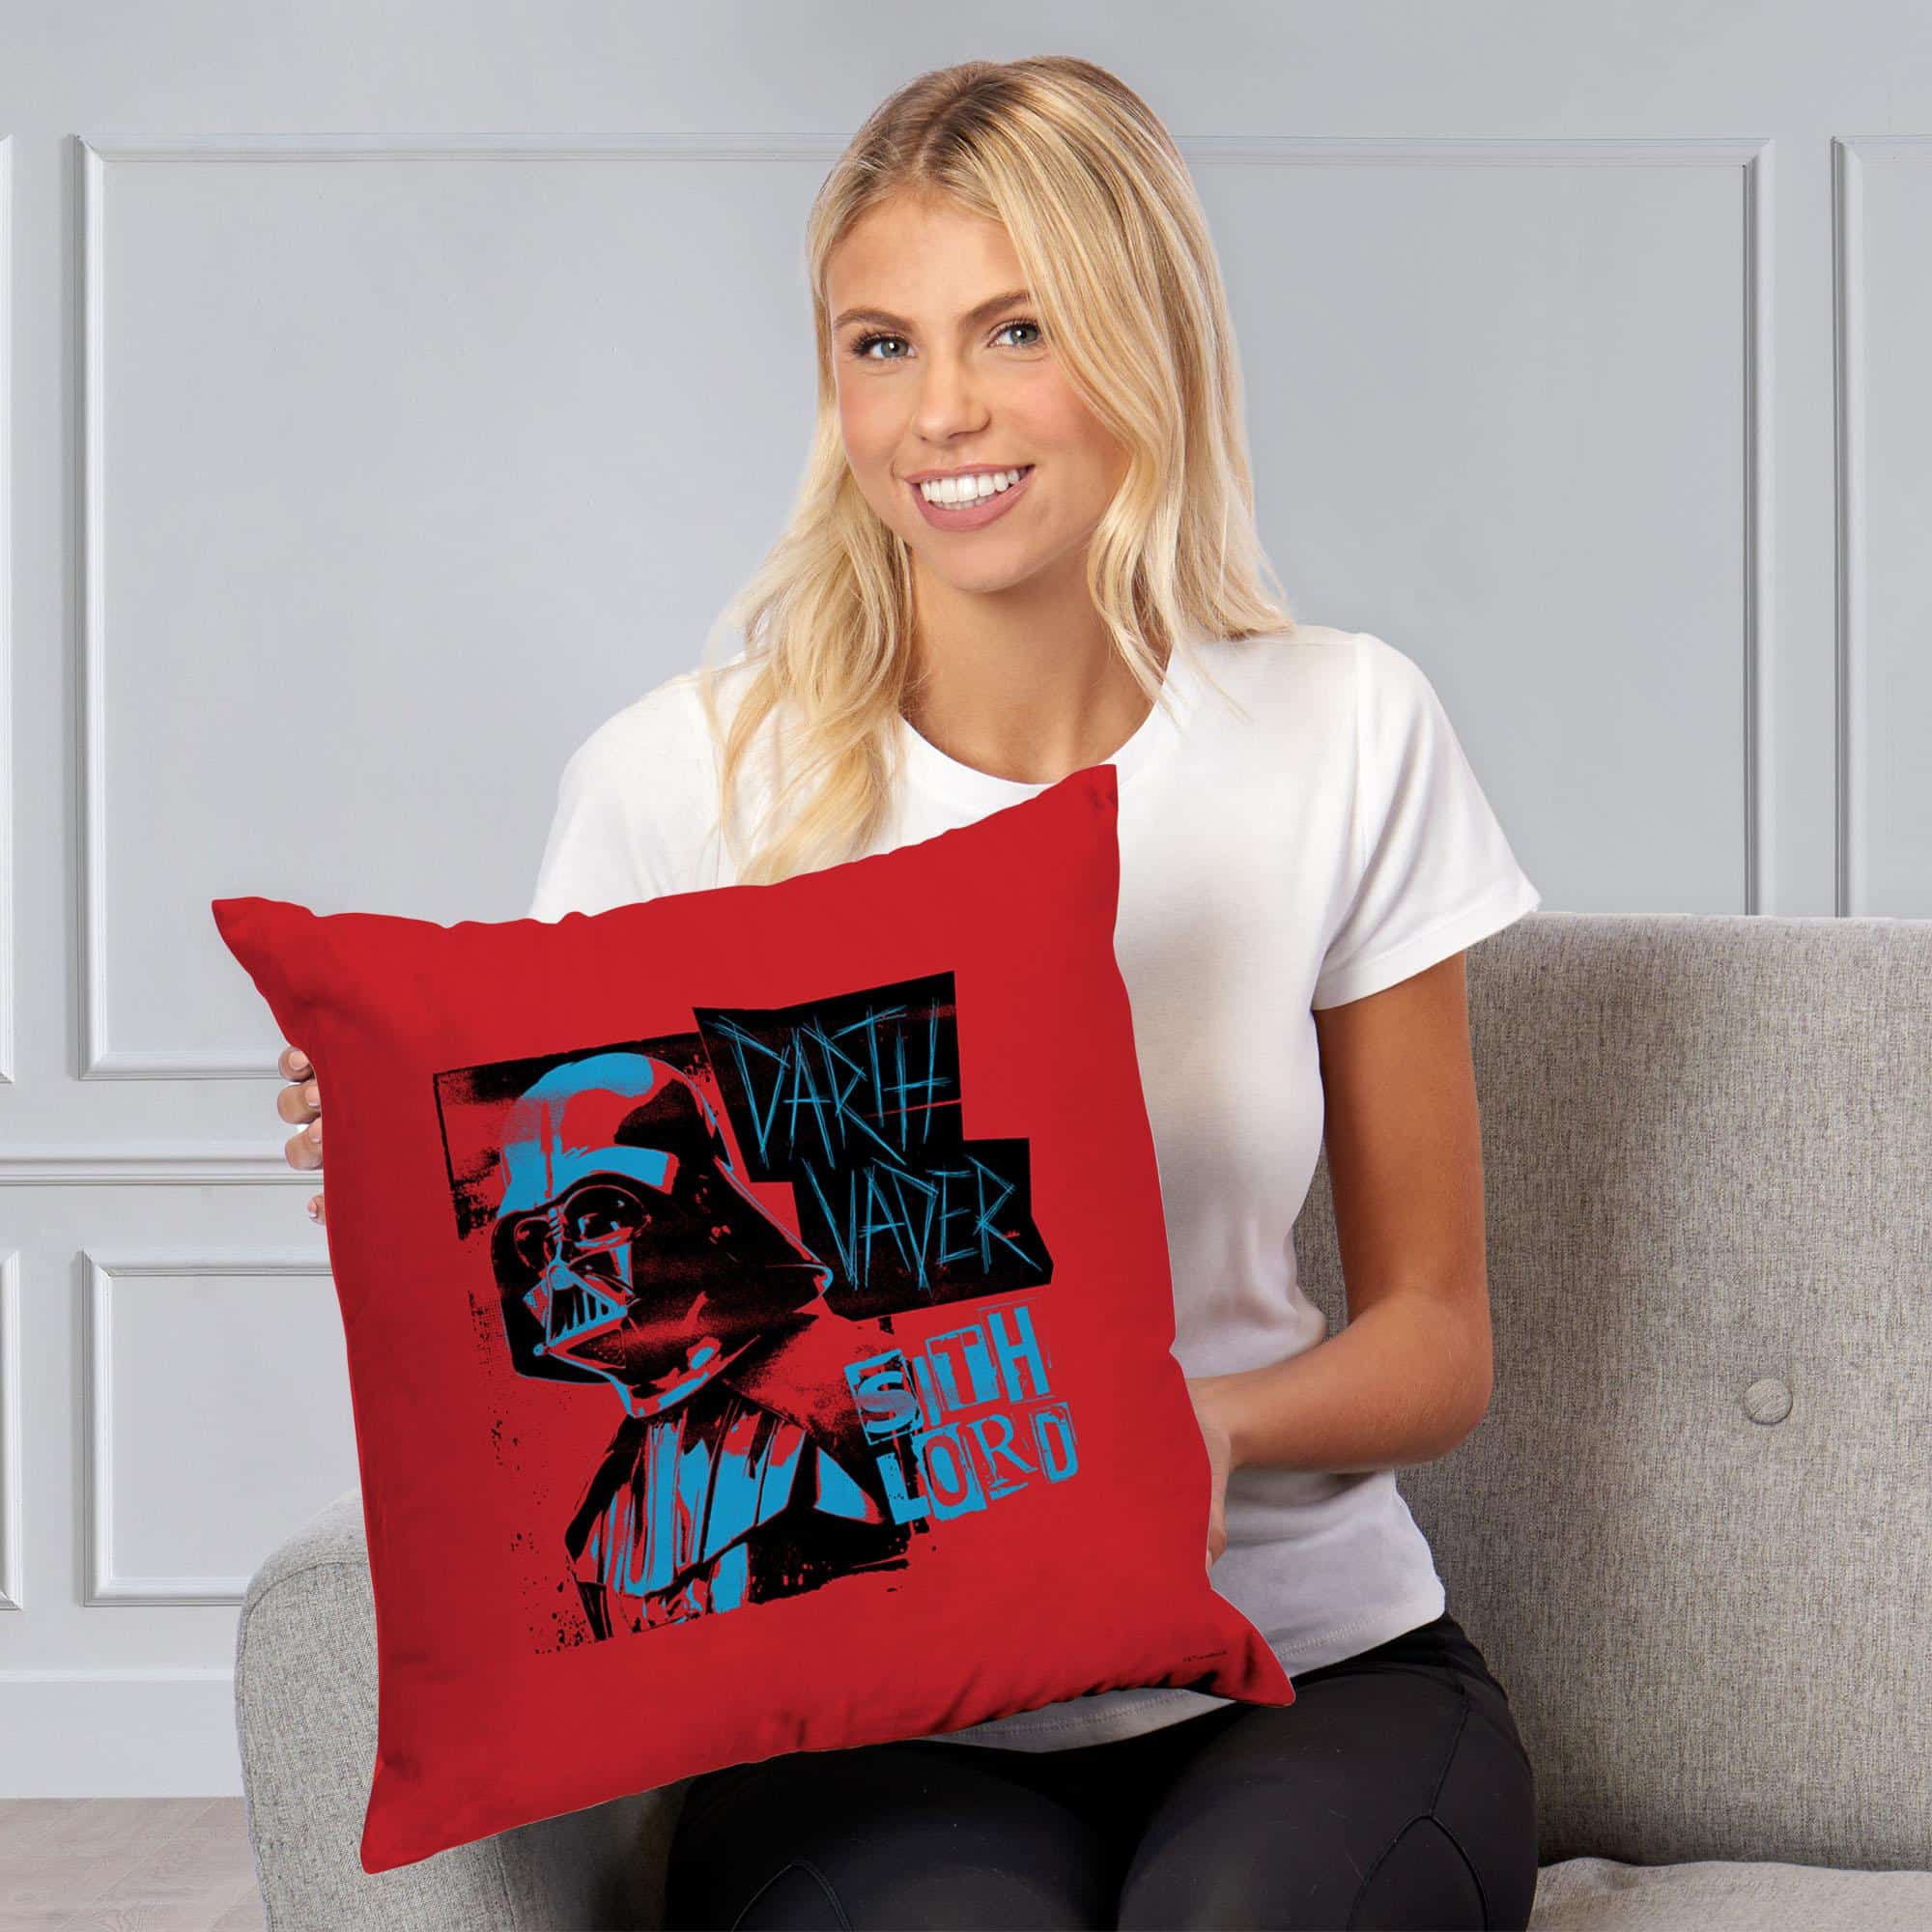 Star Wars, The Sith Lord Printed Throw Pillow